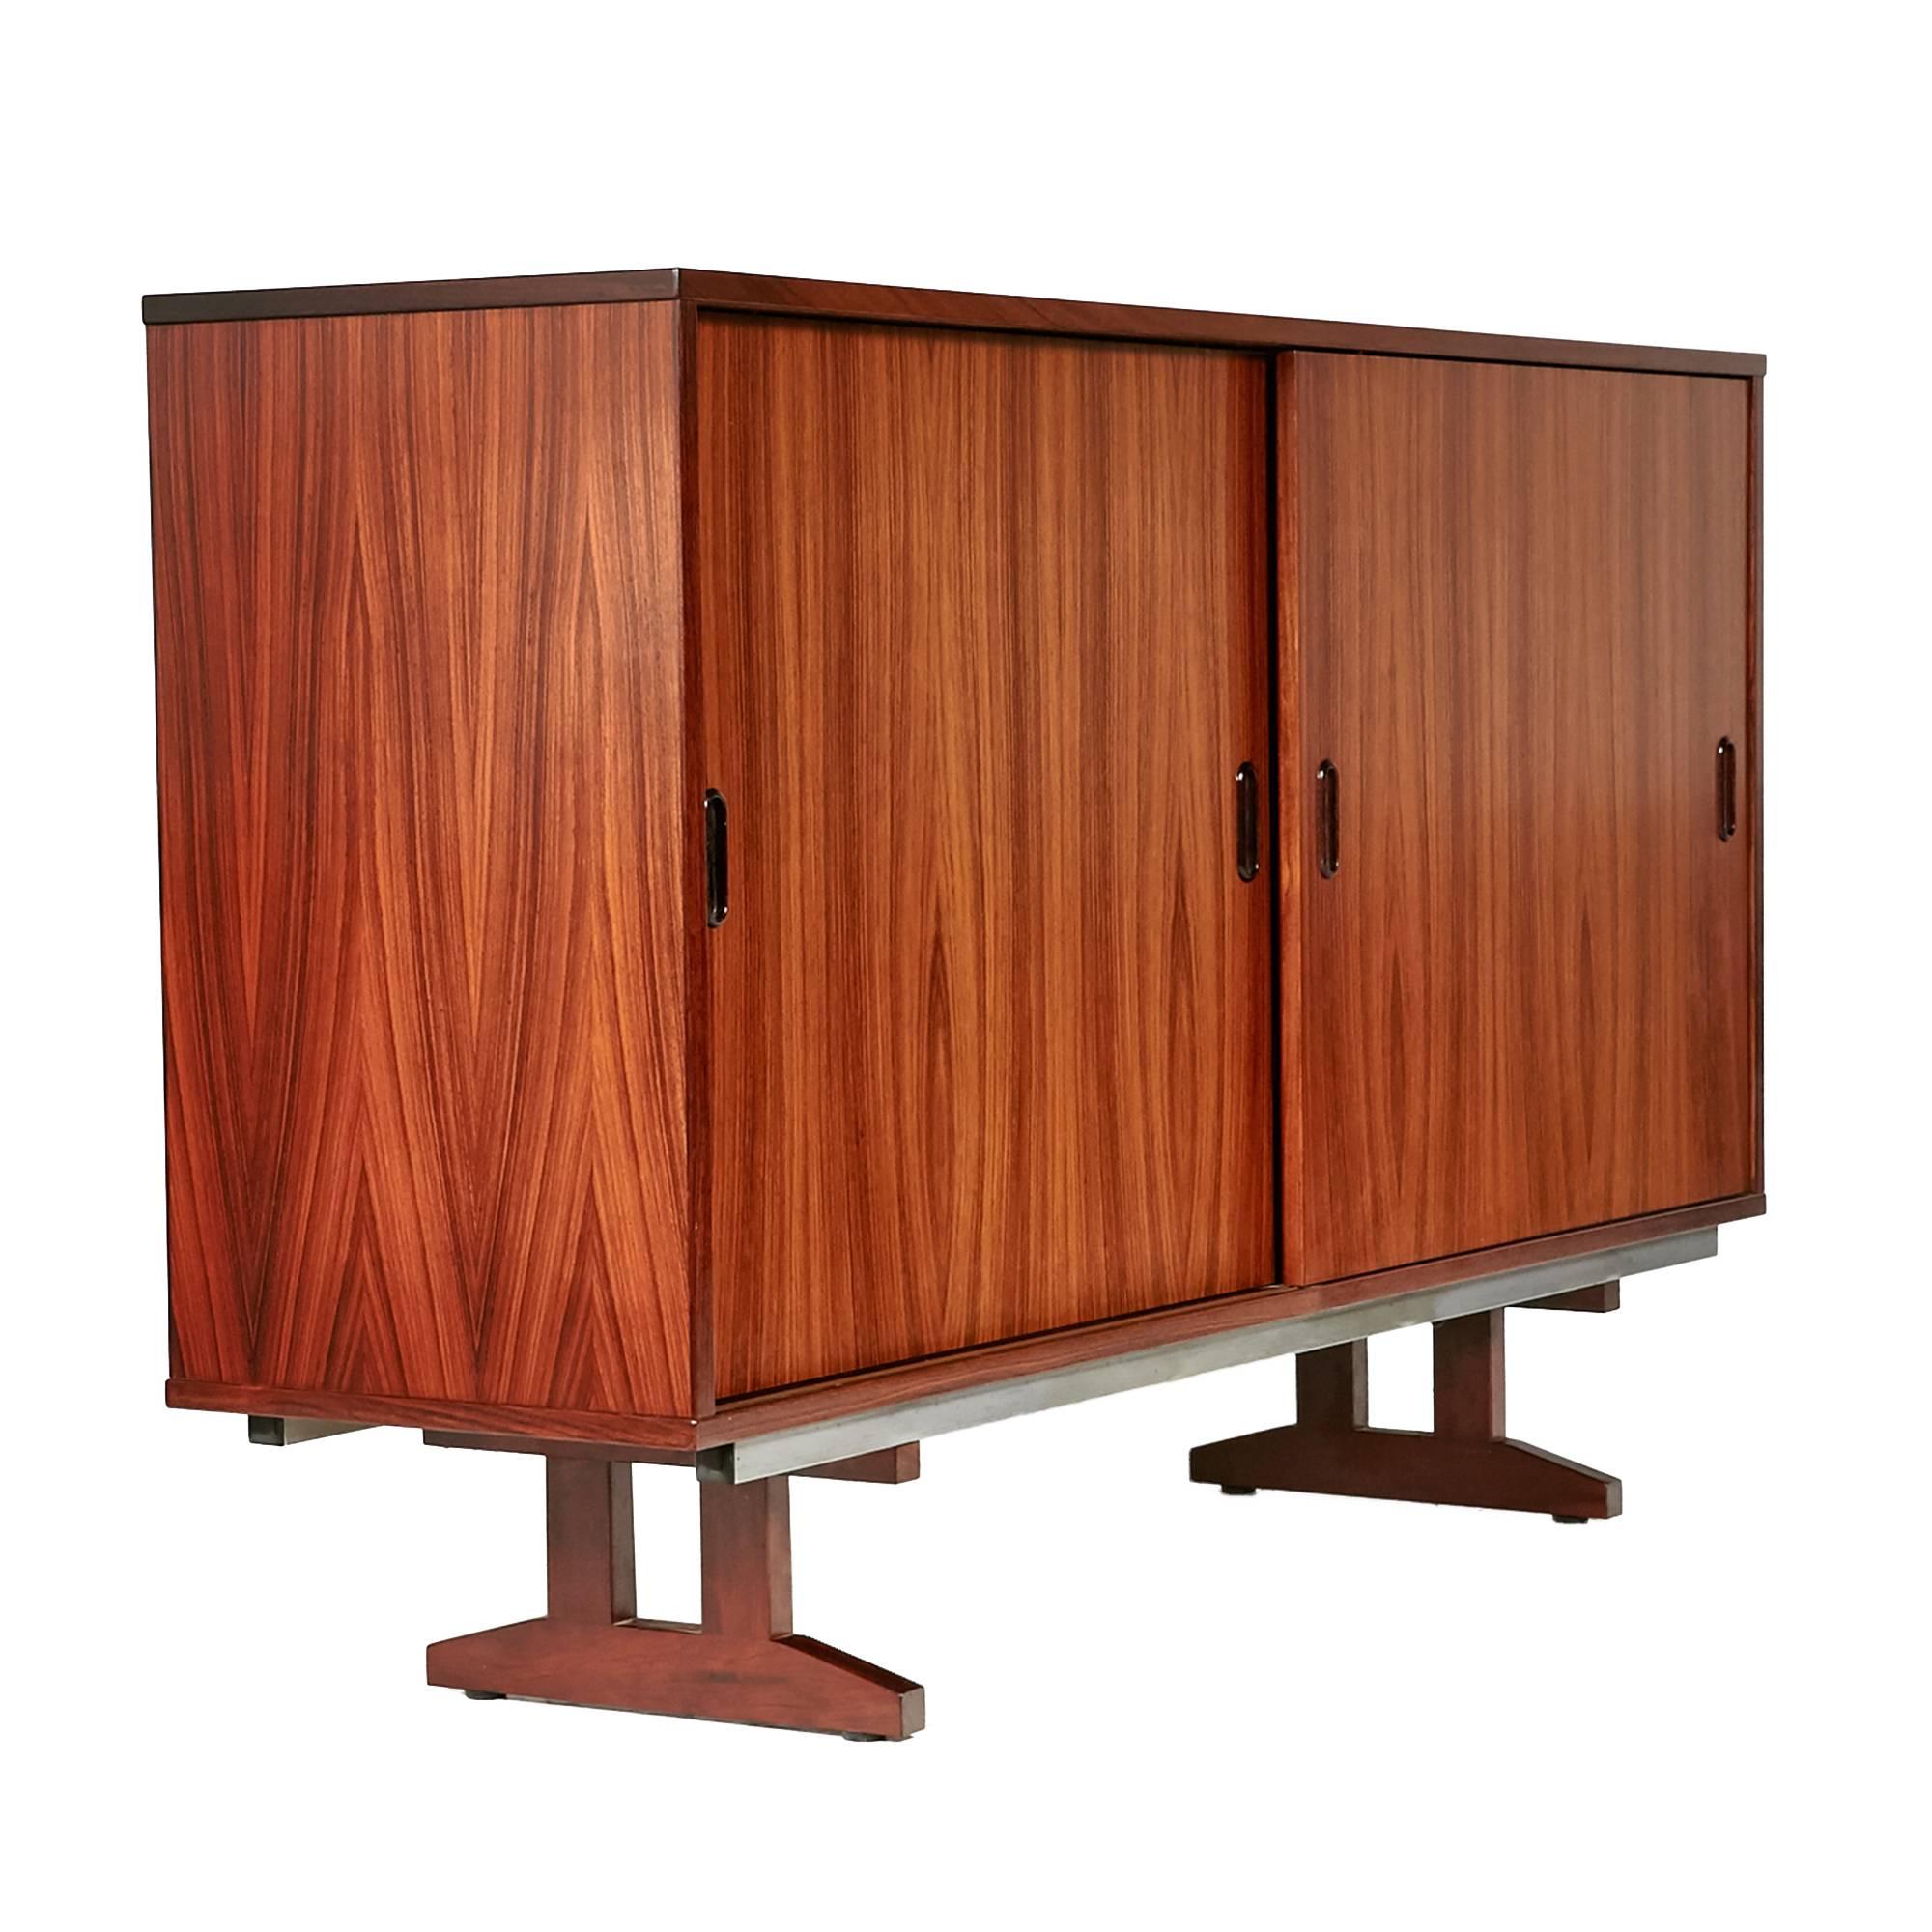 1960s Brazilian Rosewood Sliding Door Office Cabinet, Denmark In Excellent Condition For Sale In Amherst, NH